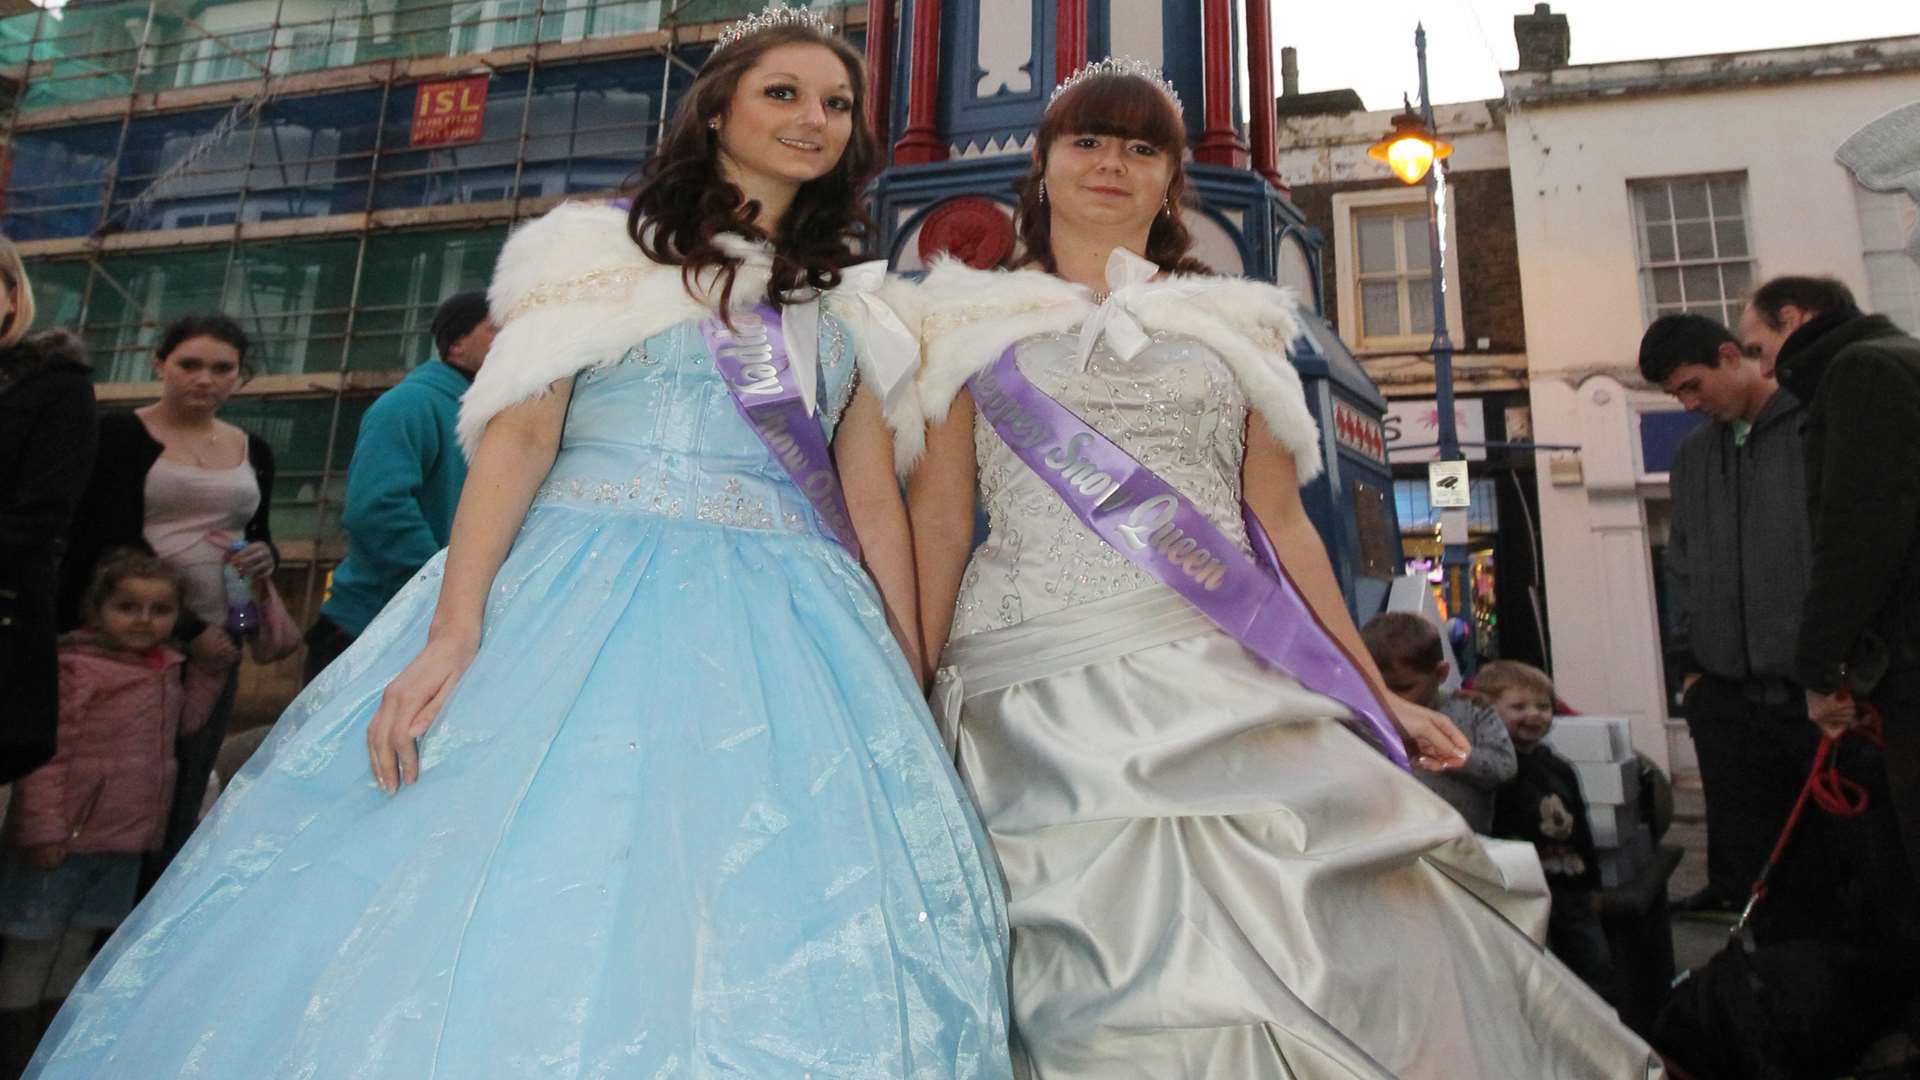 Hannah Thompson, 18, and fellow Sheppey Snow Queen Katie-Ann Goodsell, 20